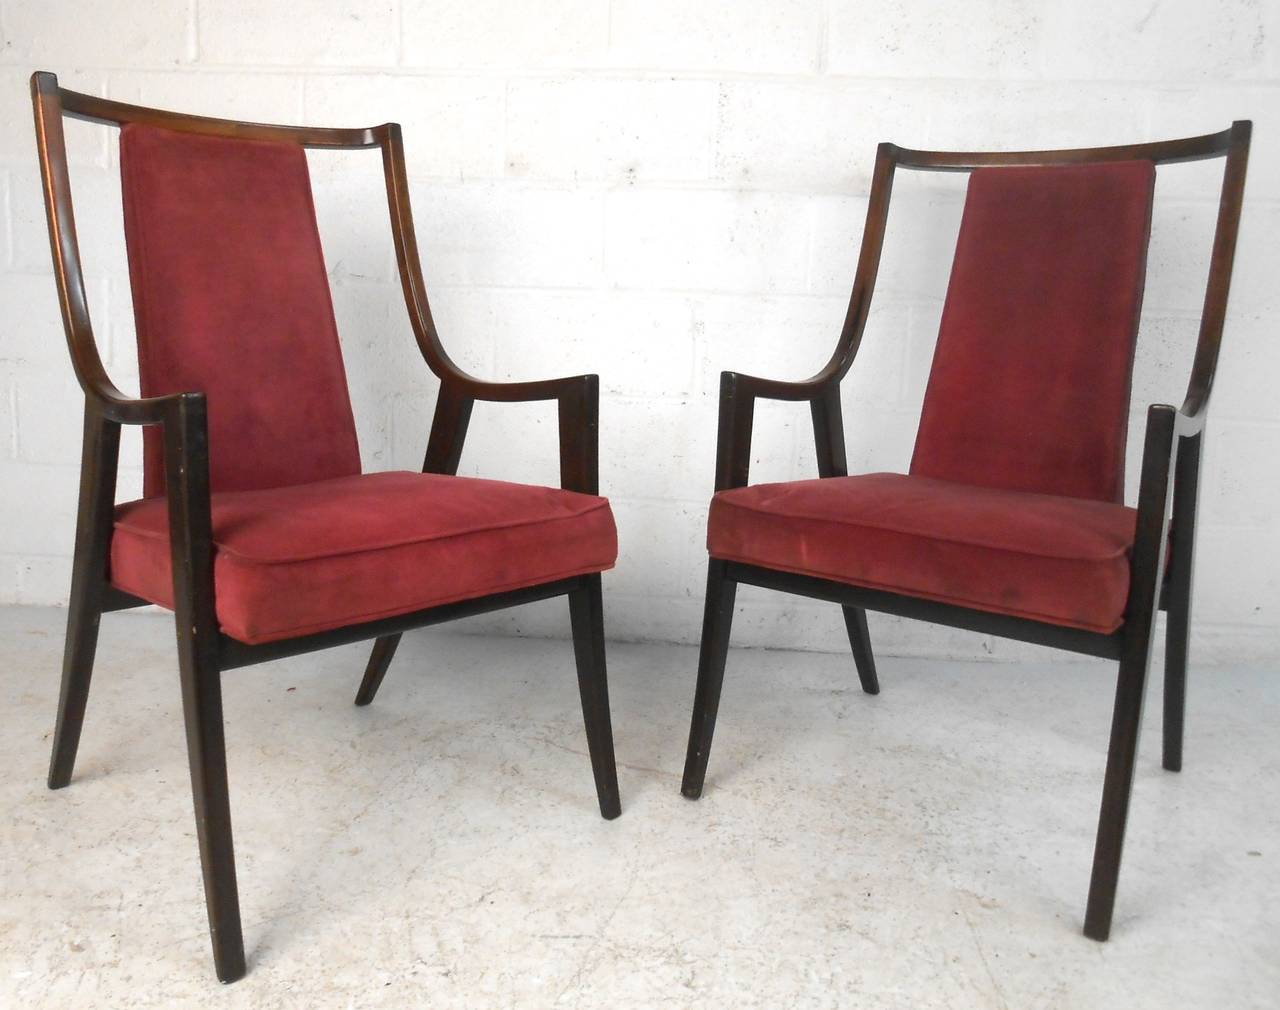 This pair of unique armchairs feature crushed velvet upholstery, comfortable high backs, and wonderfully angled tapered legs in the style of midcentury master Robsjohn-Gibbings. Please confirm item location (NY or NJ).